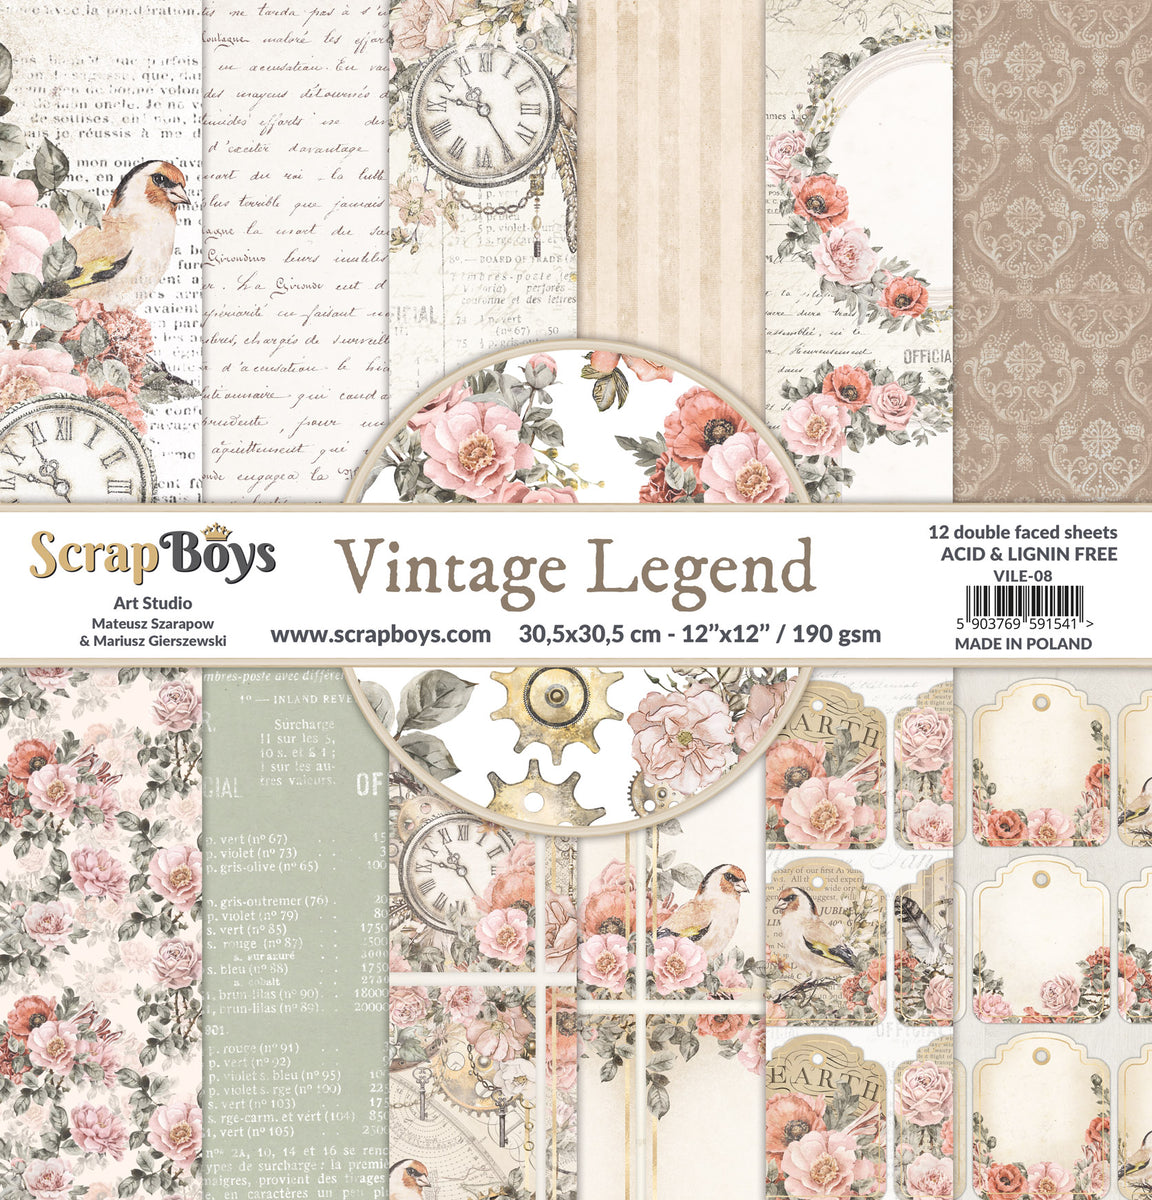 Bargain Paradise 120 Aged Paper - Antique Looking Vintage Papers with Classic Aged Paper Designs - Six Unique Old Looking Paper Designs - Vintage